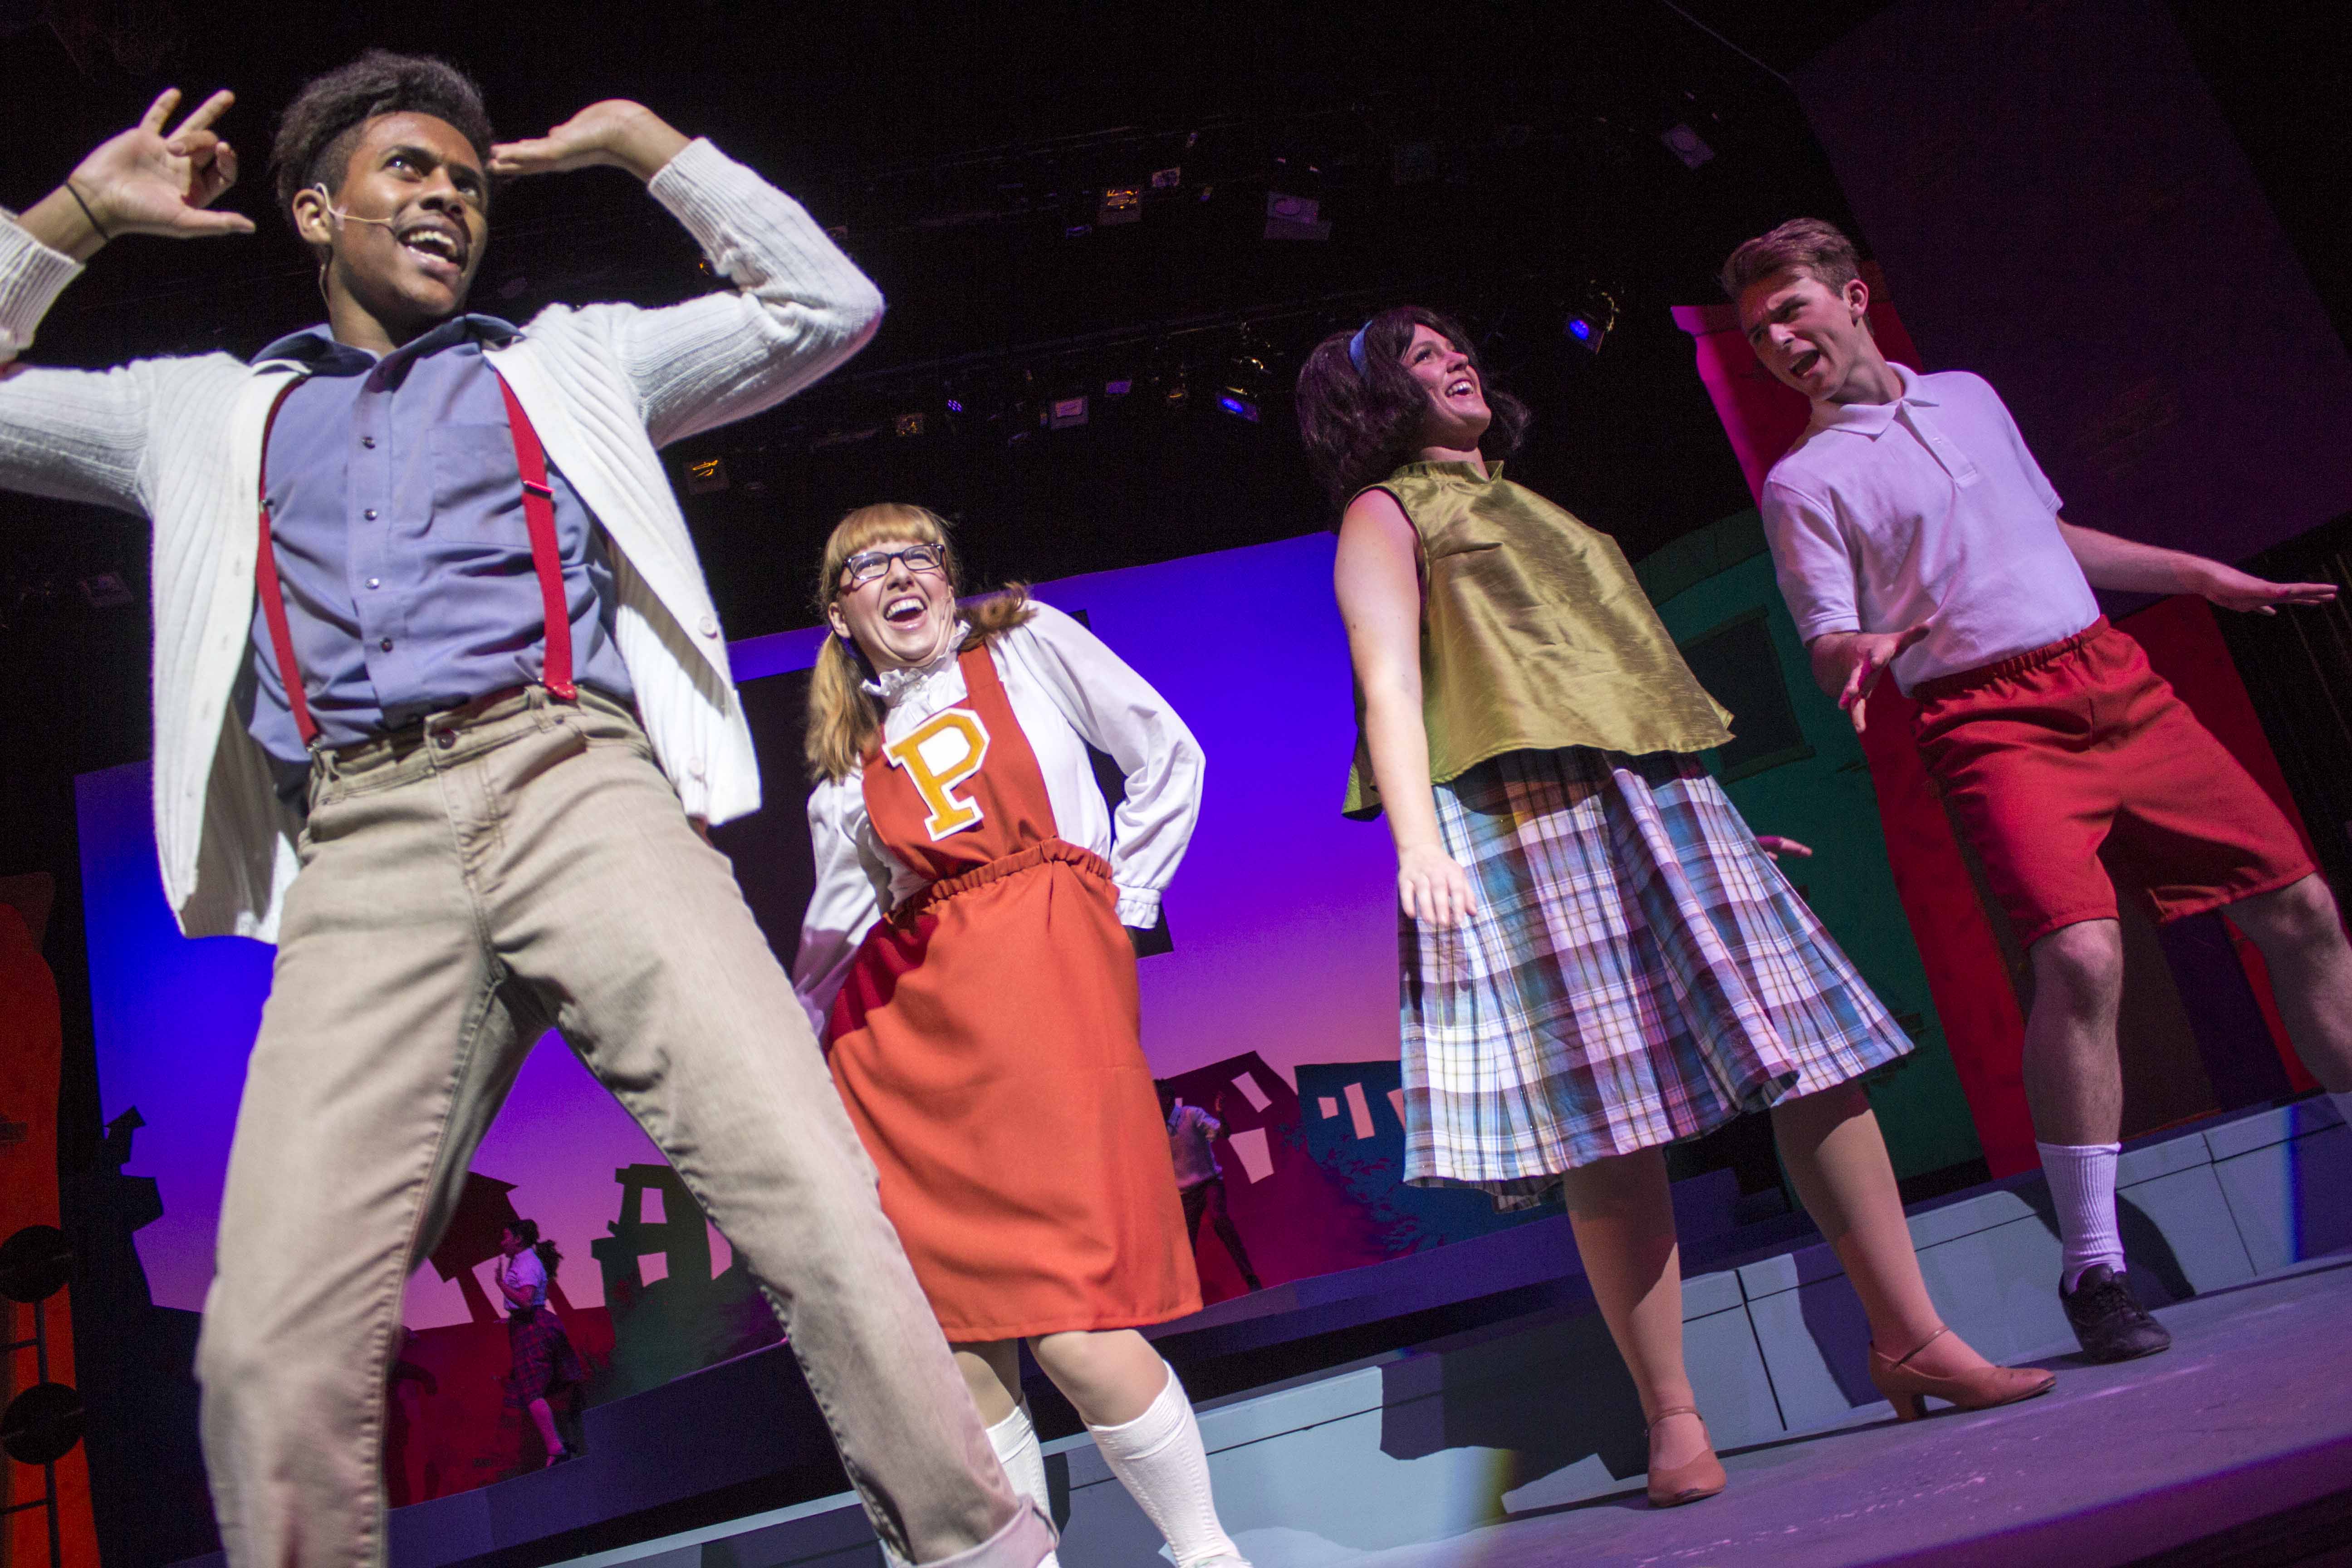 Hairspray+kicks+off+March+with+an+upbeat+opening+night